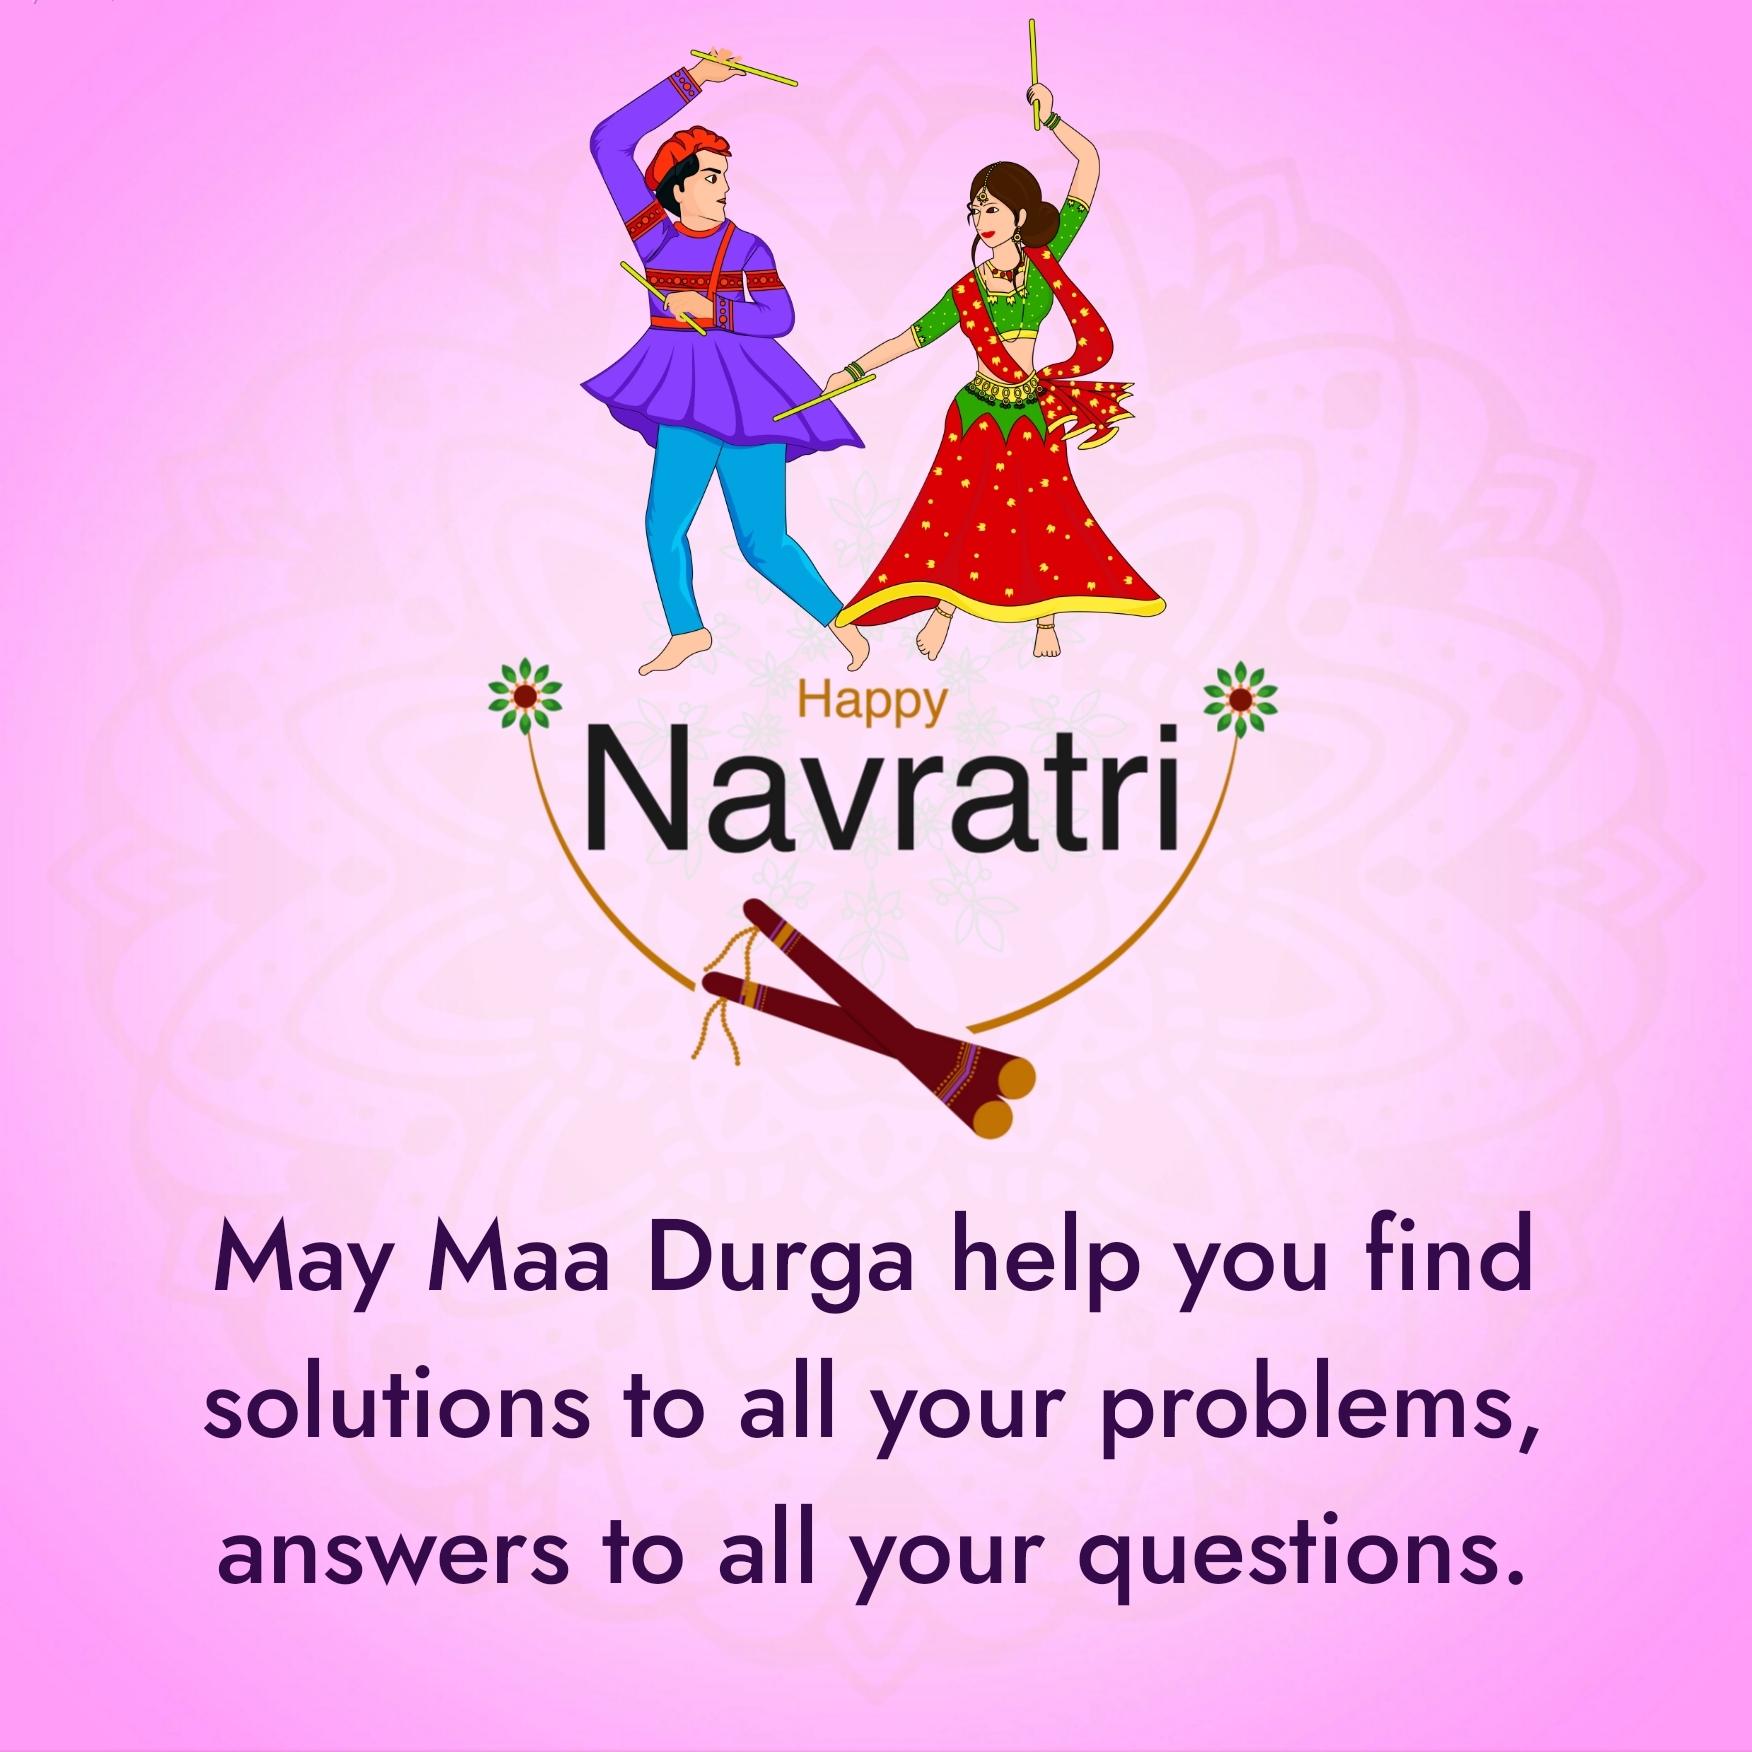 May Maa Durga help you find solutions to all your problems